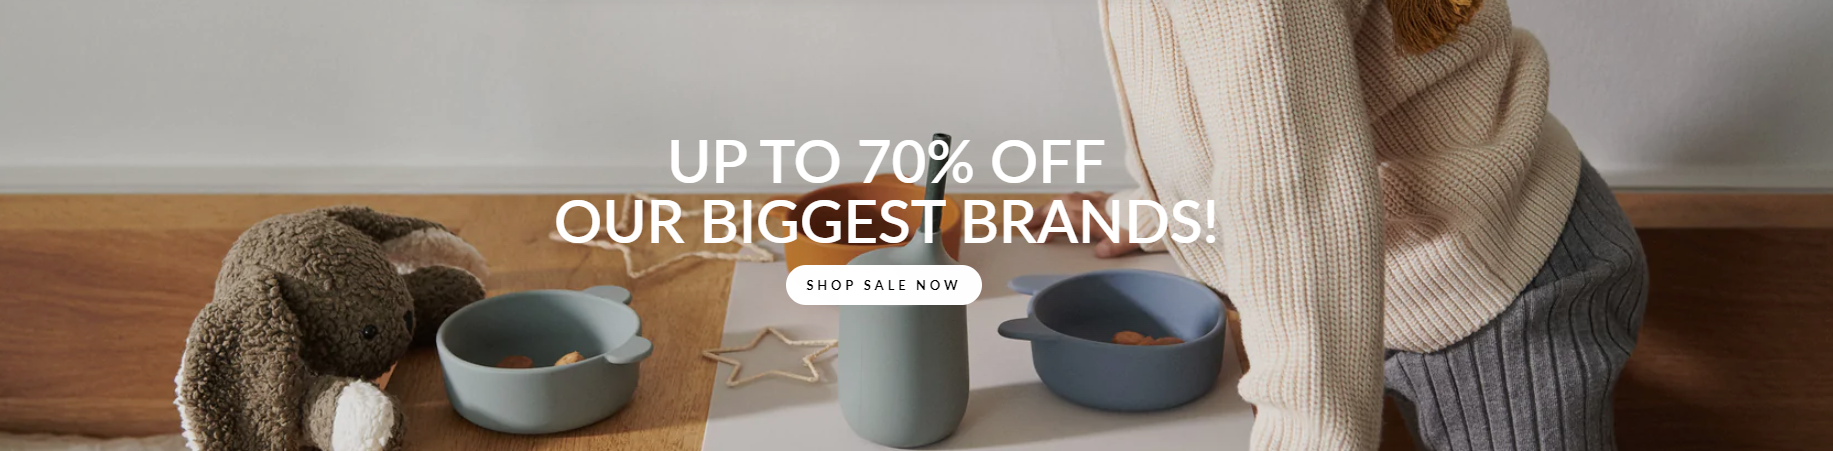 Metrobaby Sale - Up to 70% OFF biggest brands on prams, baby toys, clothing and more